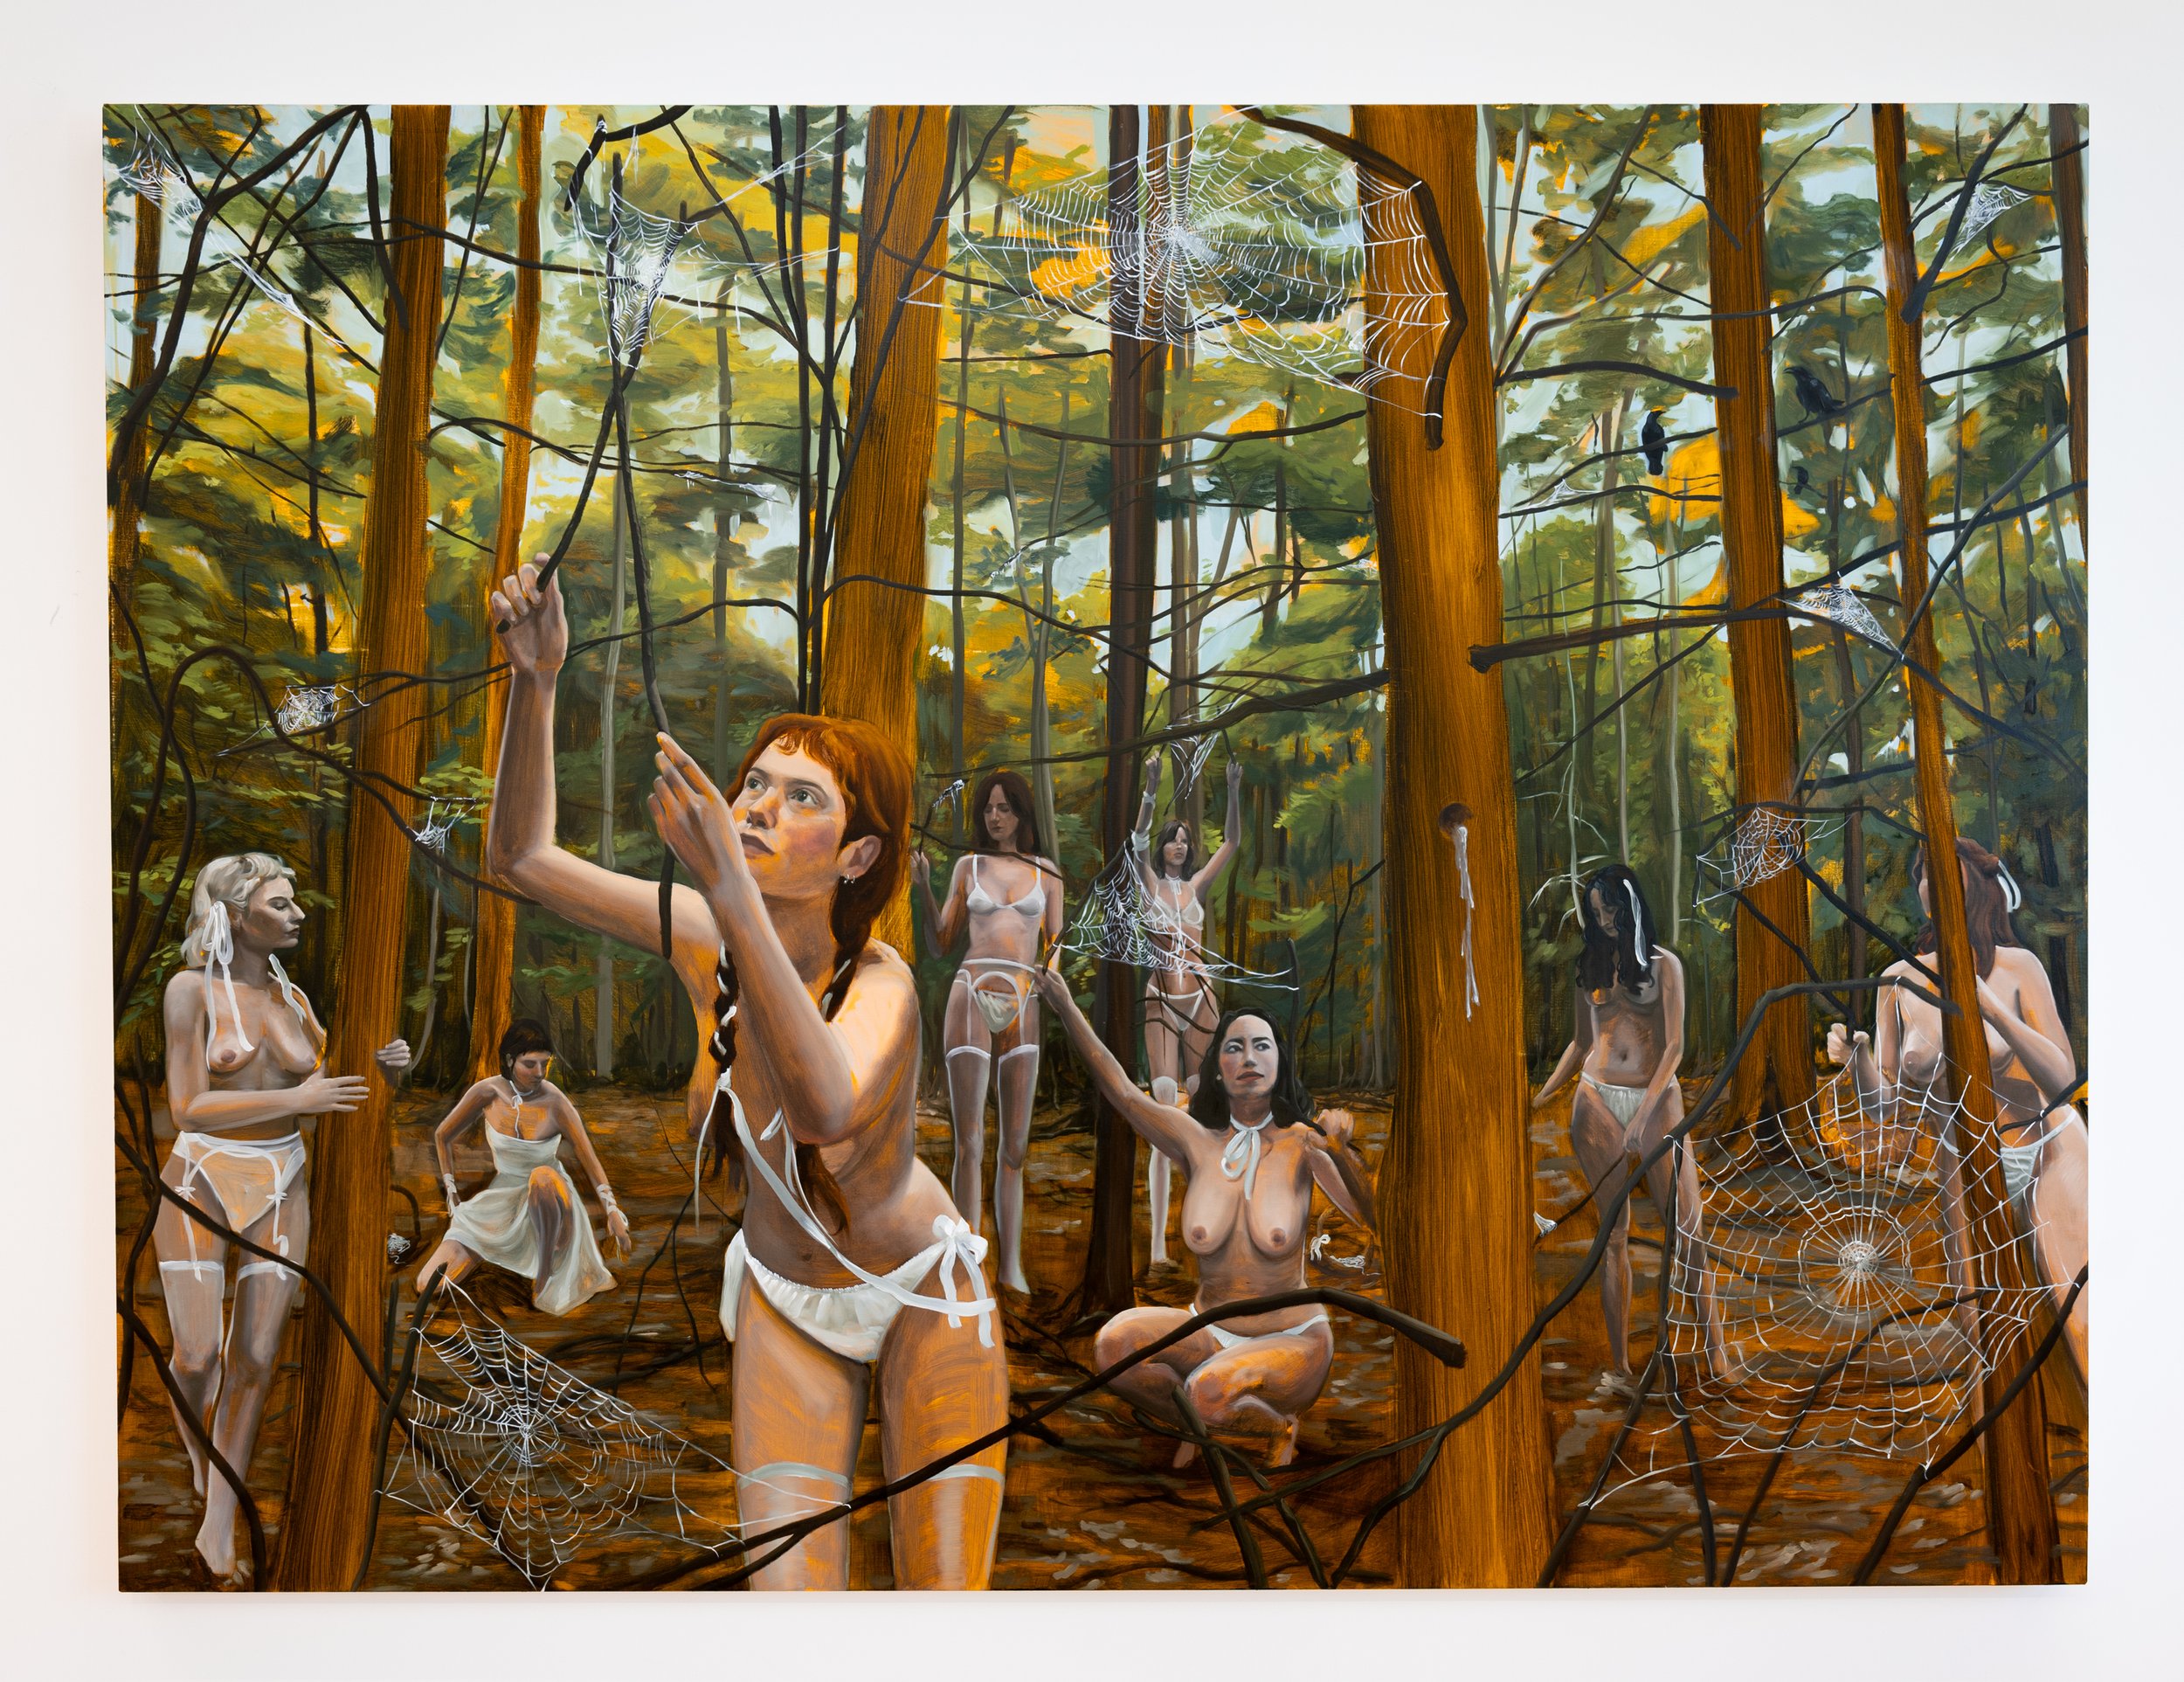   Gathering Webs for Spider Silk , 2024, Oil on linen, 60 x 80 in, 152.4 x 203.2 cm 